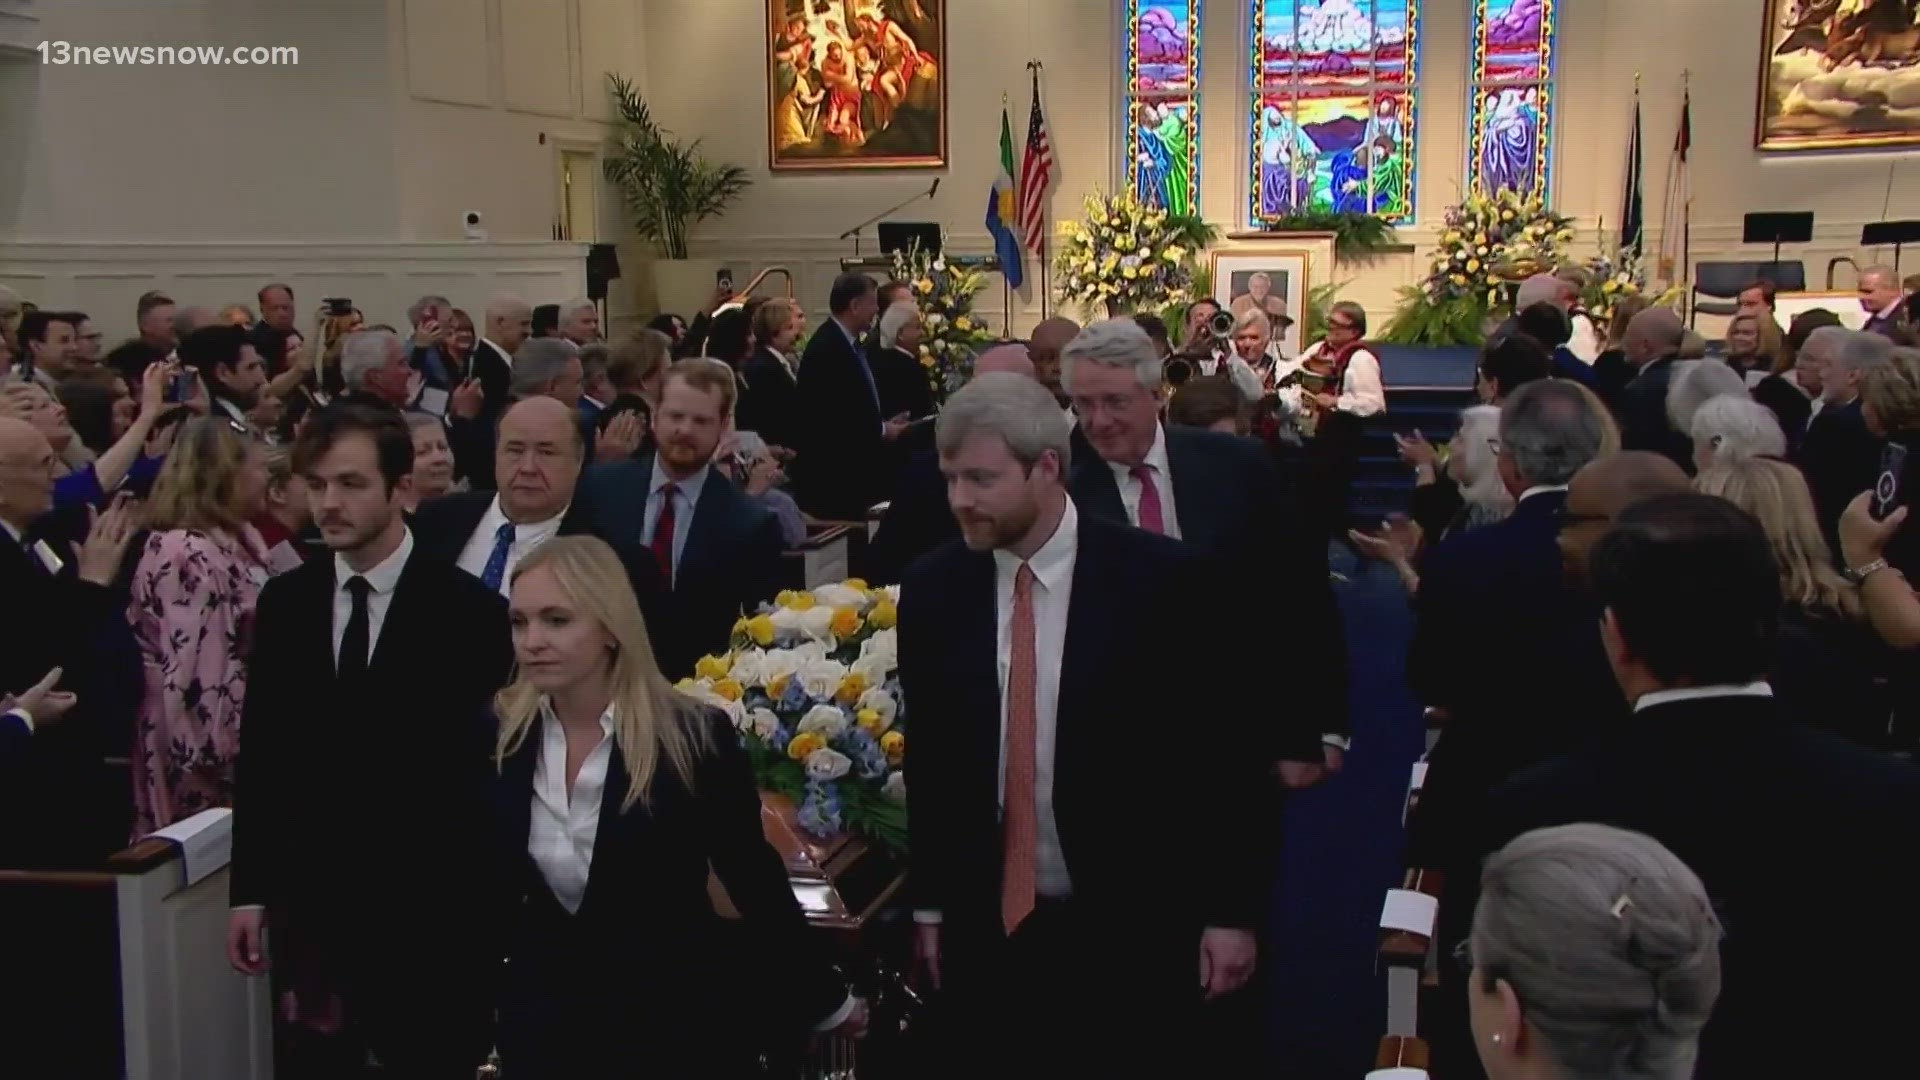 The Christian Broadcasting Network streamed the memorial services. Family friends and loved ones spoke at the event while honoring his legacy.